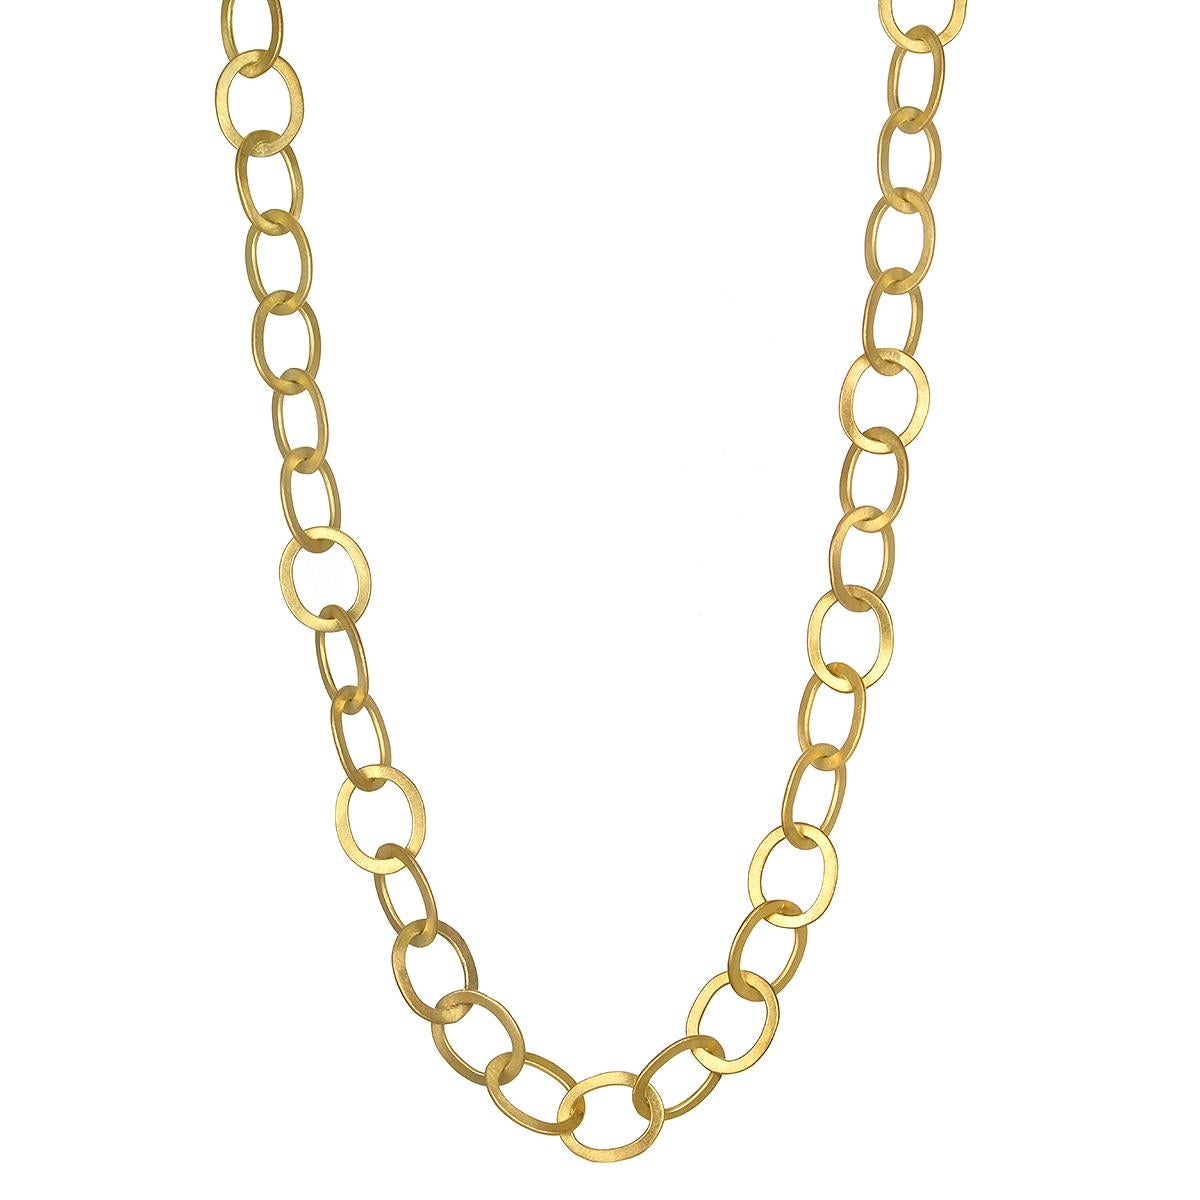 Women's or Men's Faye Kim 18 Karat Gold Oval Planished Link Chain  For Sale